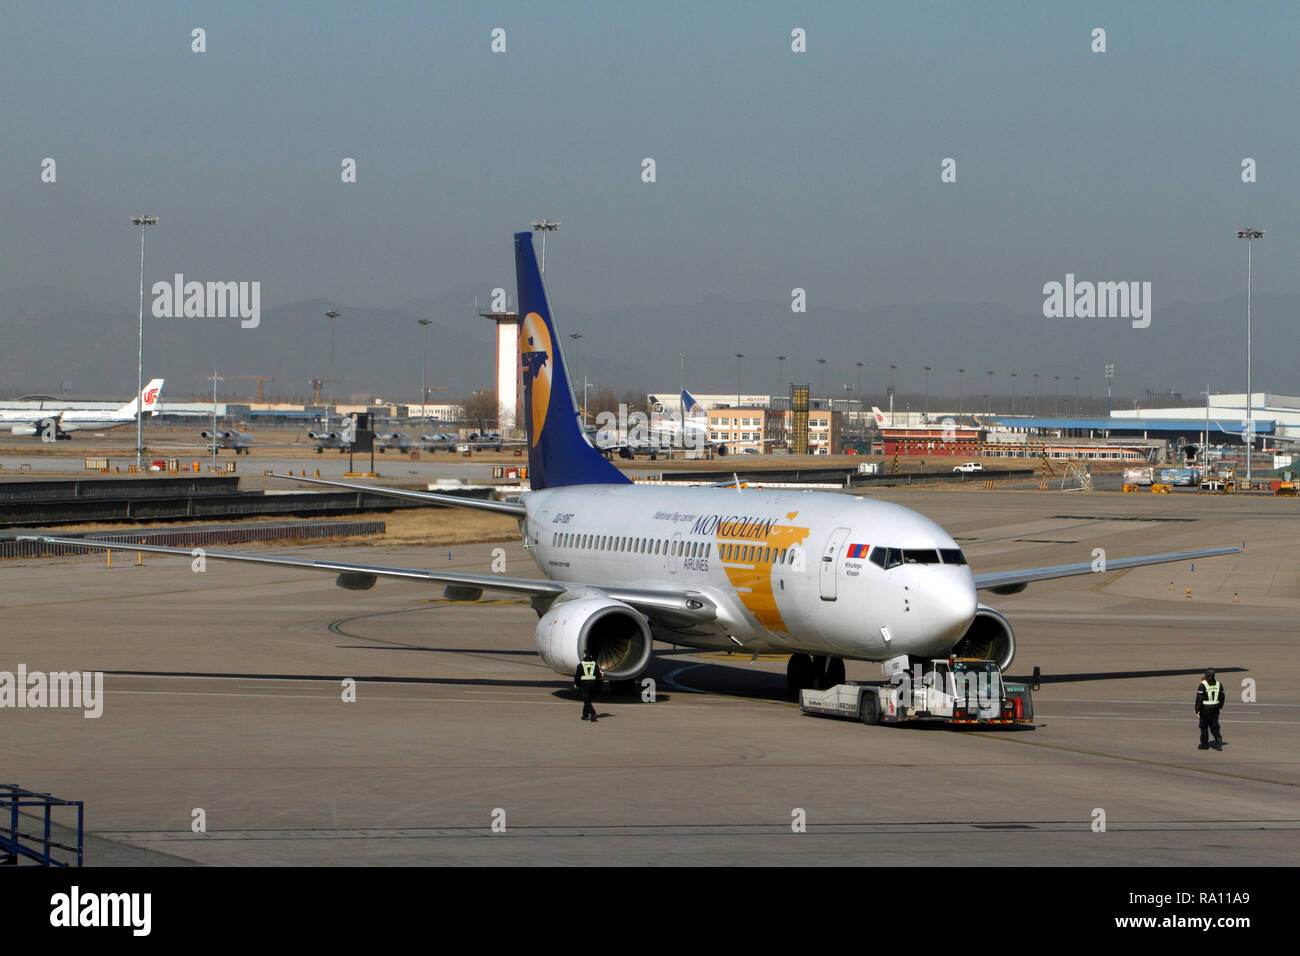 Beoing 737-700 Mongolian Airlines. National flag carrier, Mongolian Ailrlines. Pushing off at Beijing Capital International Airport, China. Stock Photo